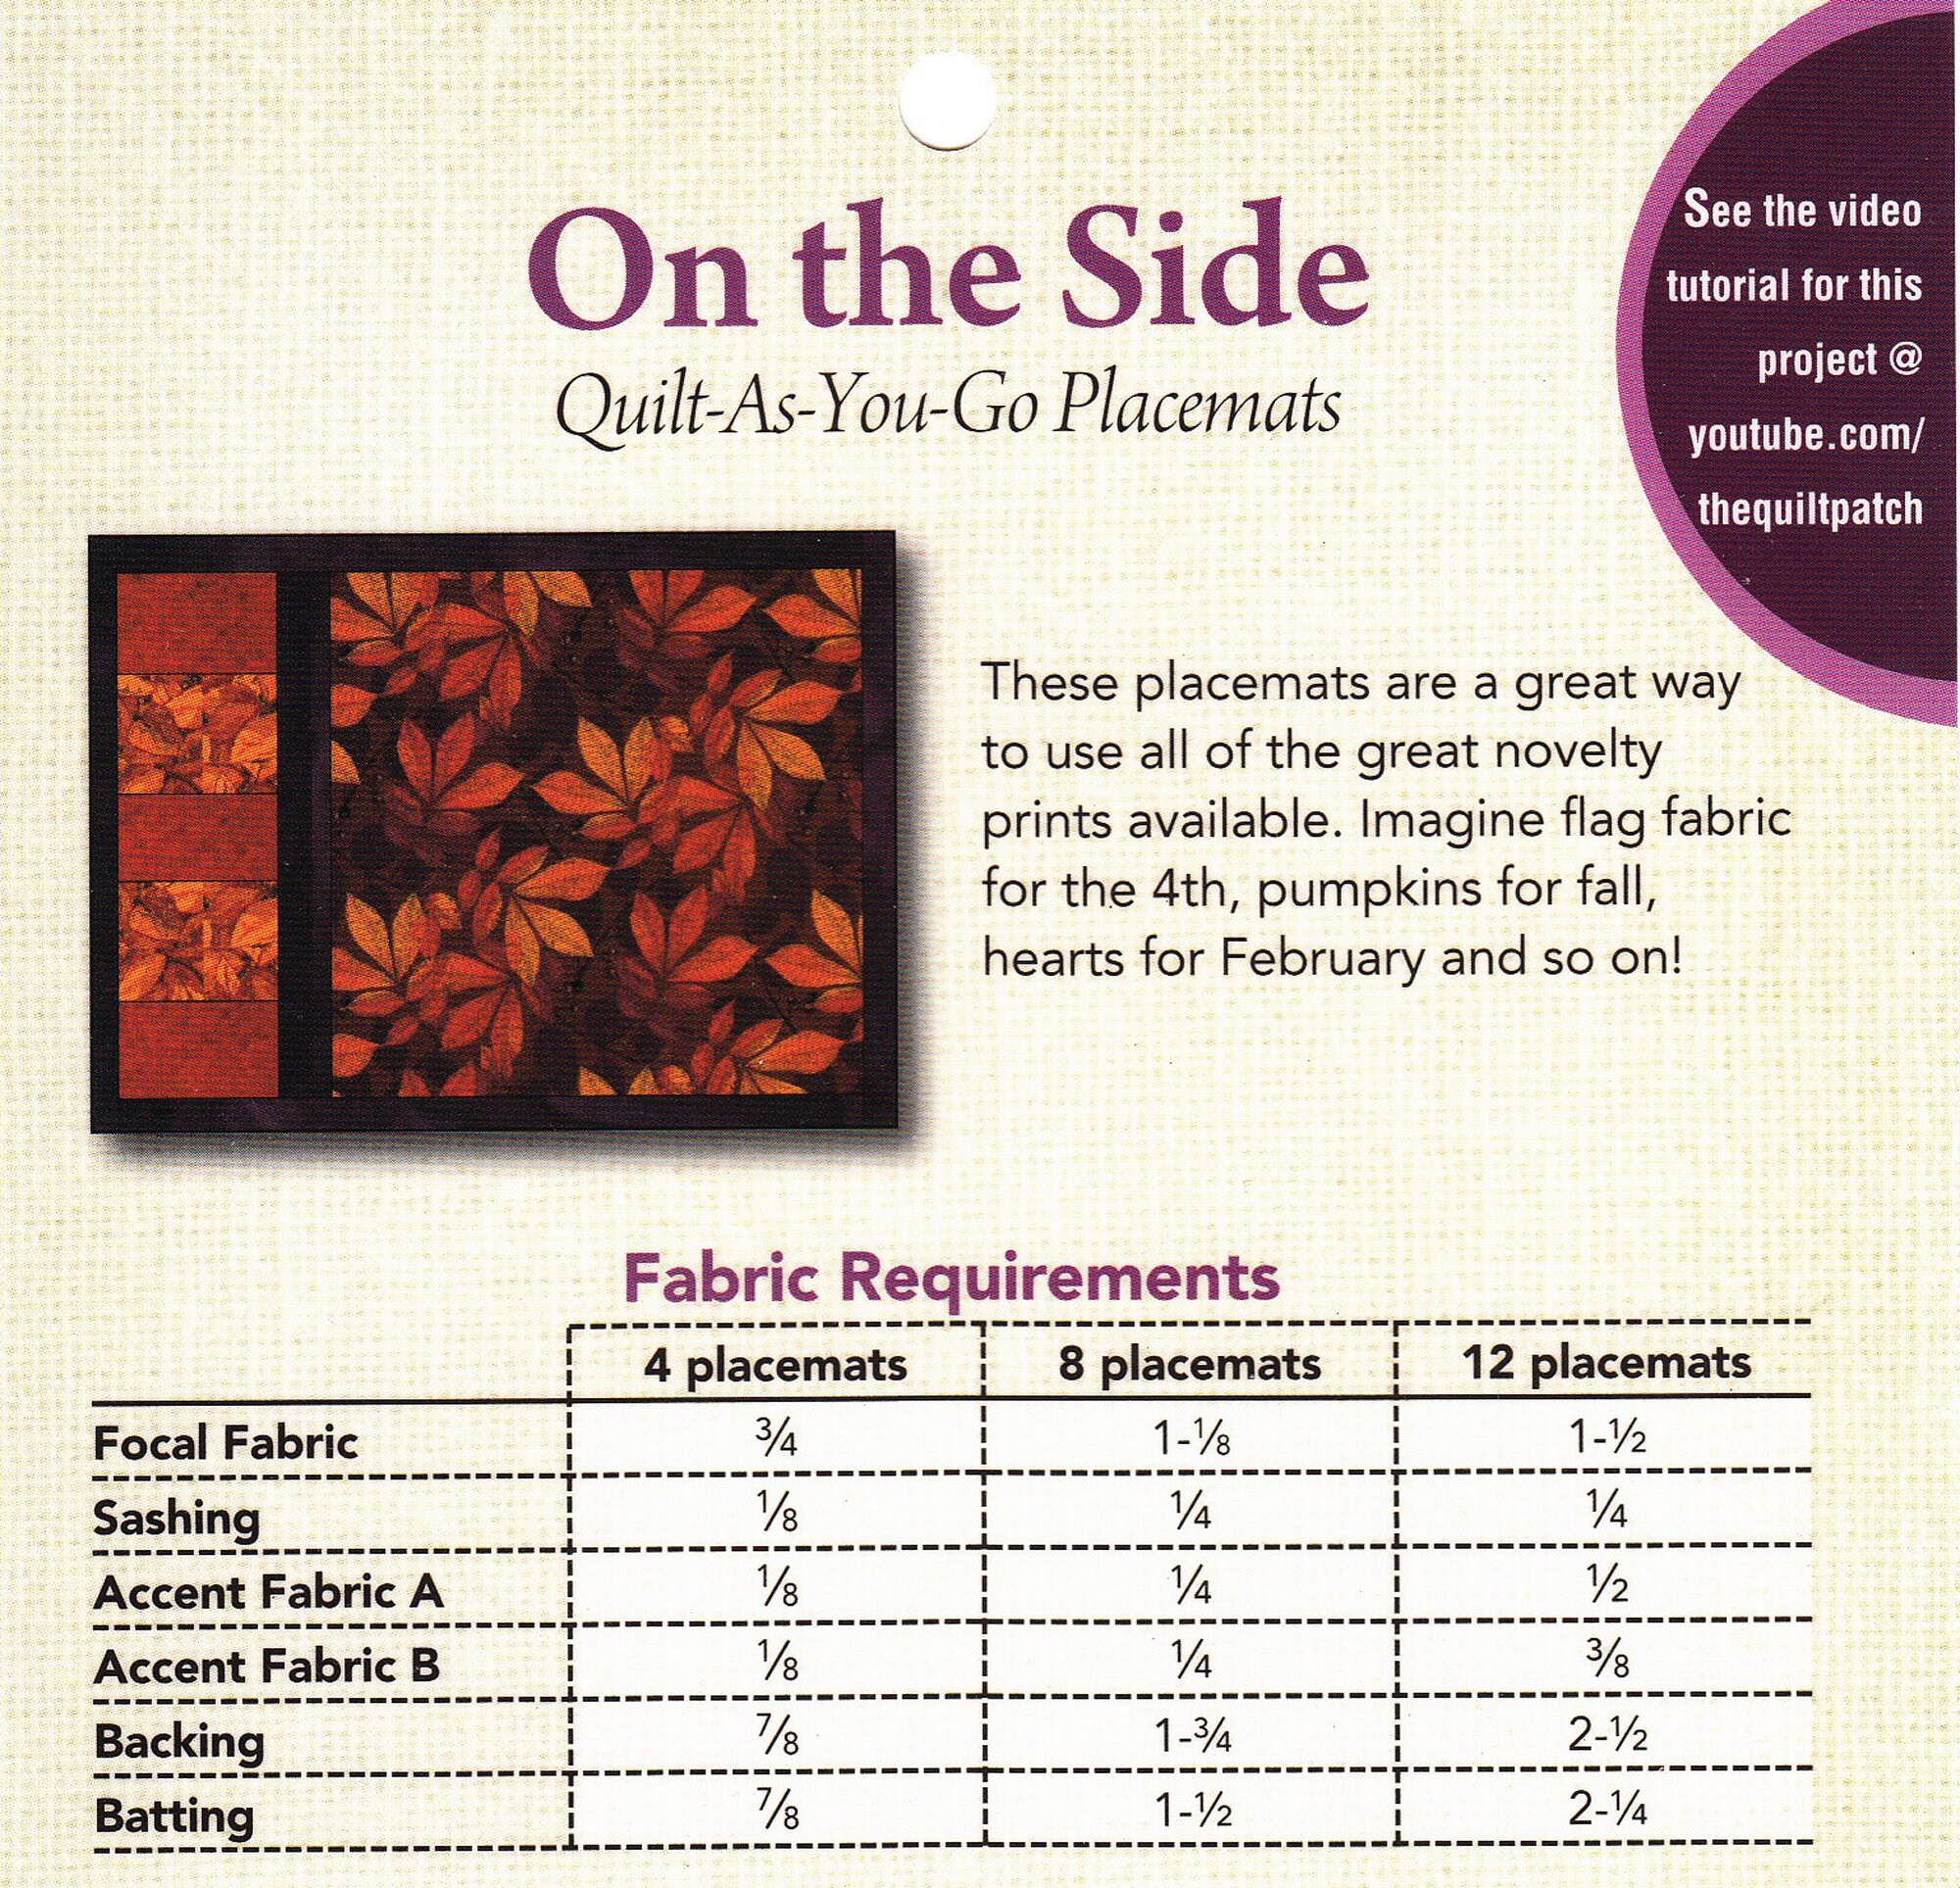 on The Side - Quilt-As-You-Go Placemats